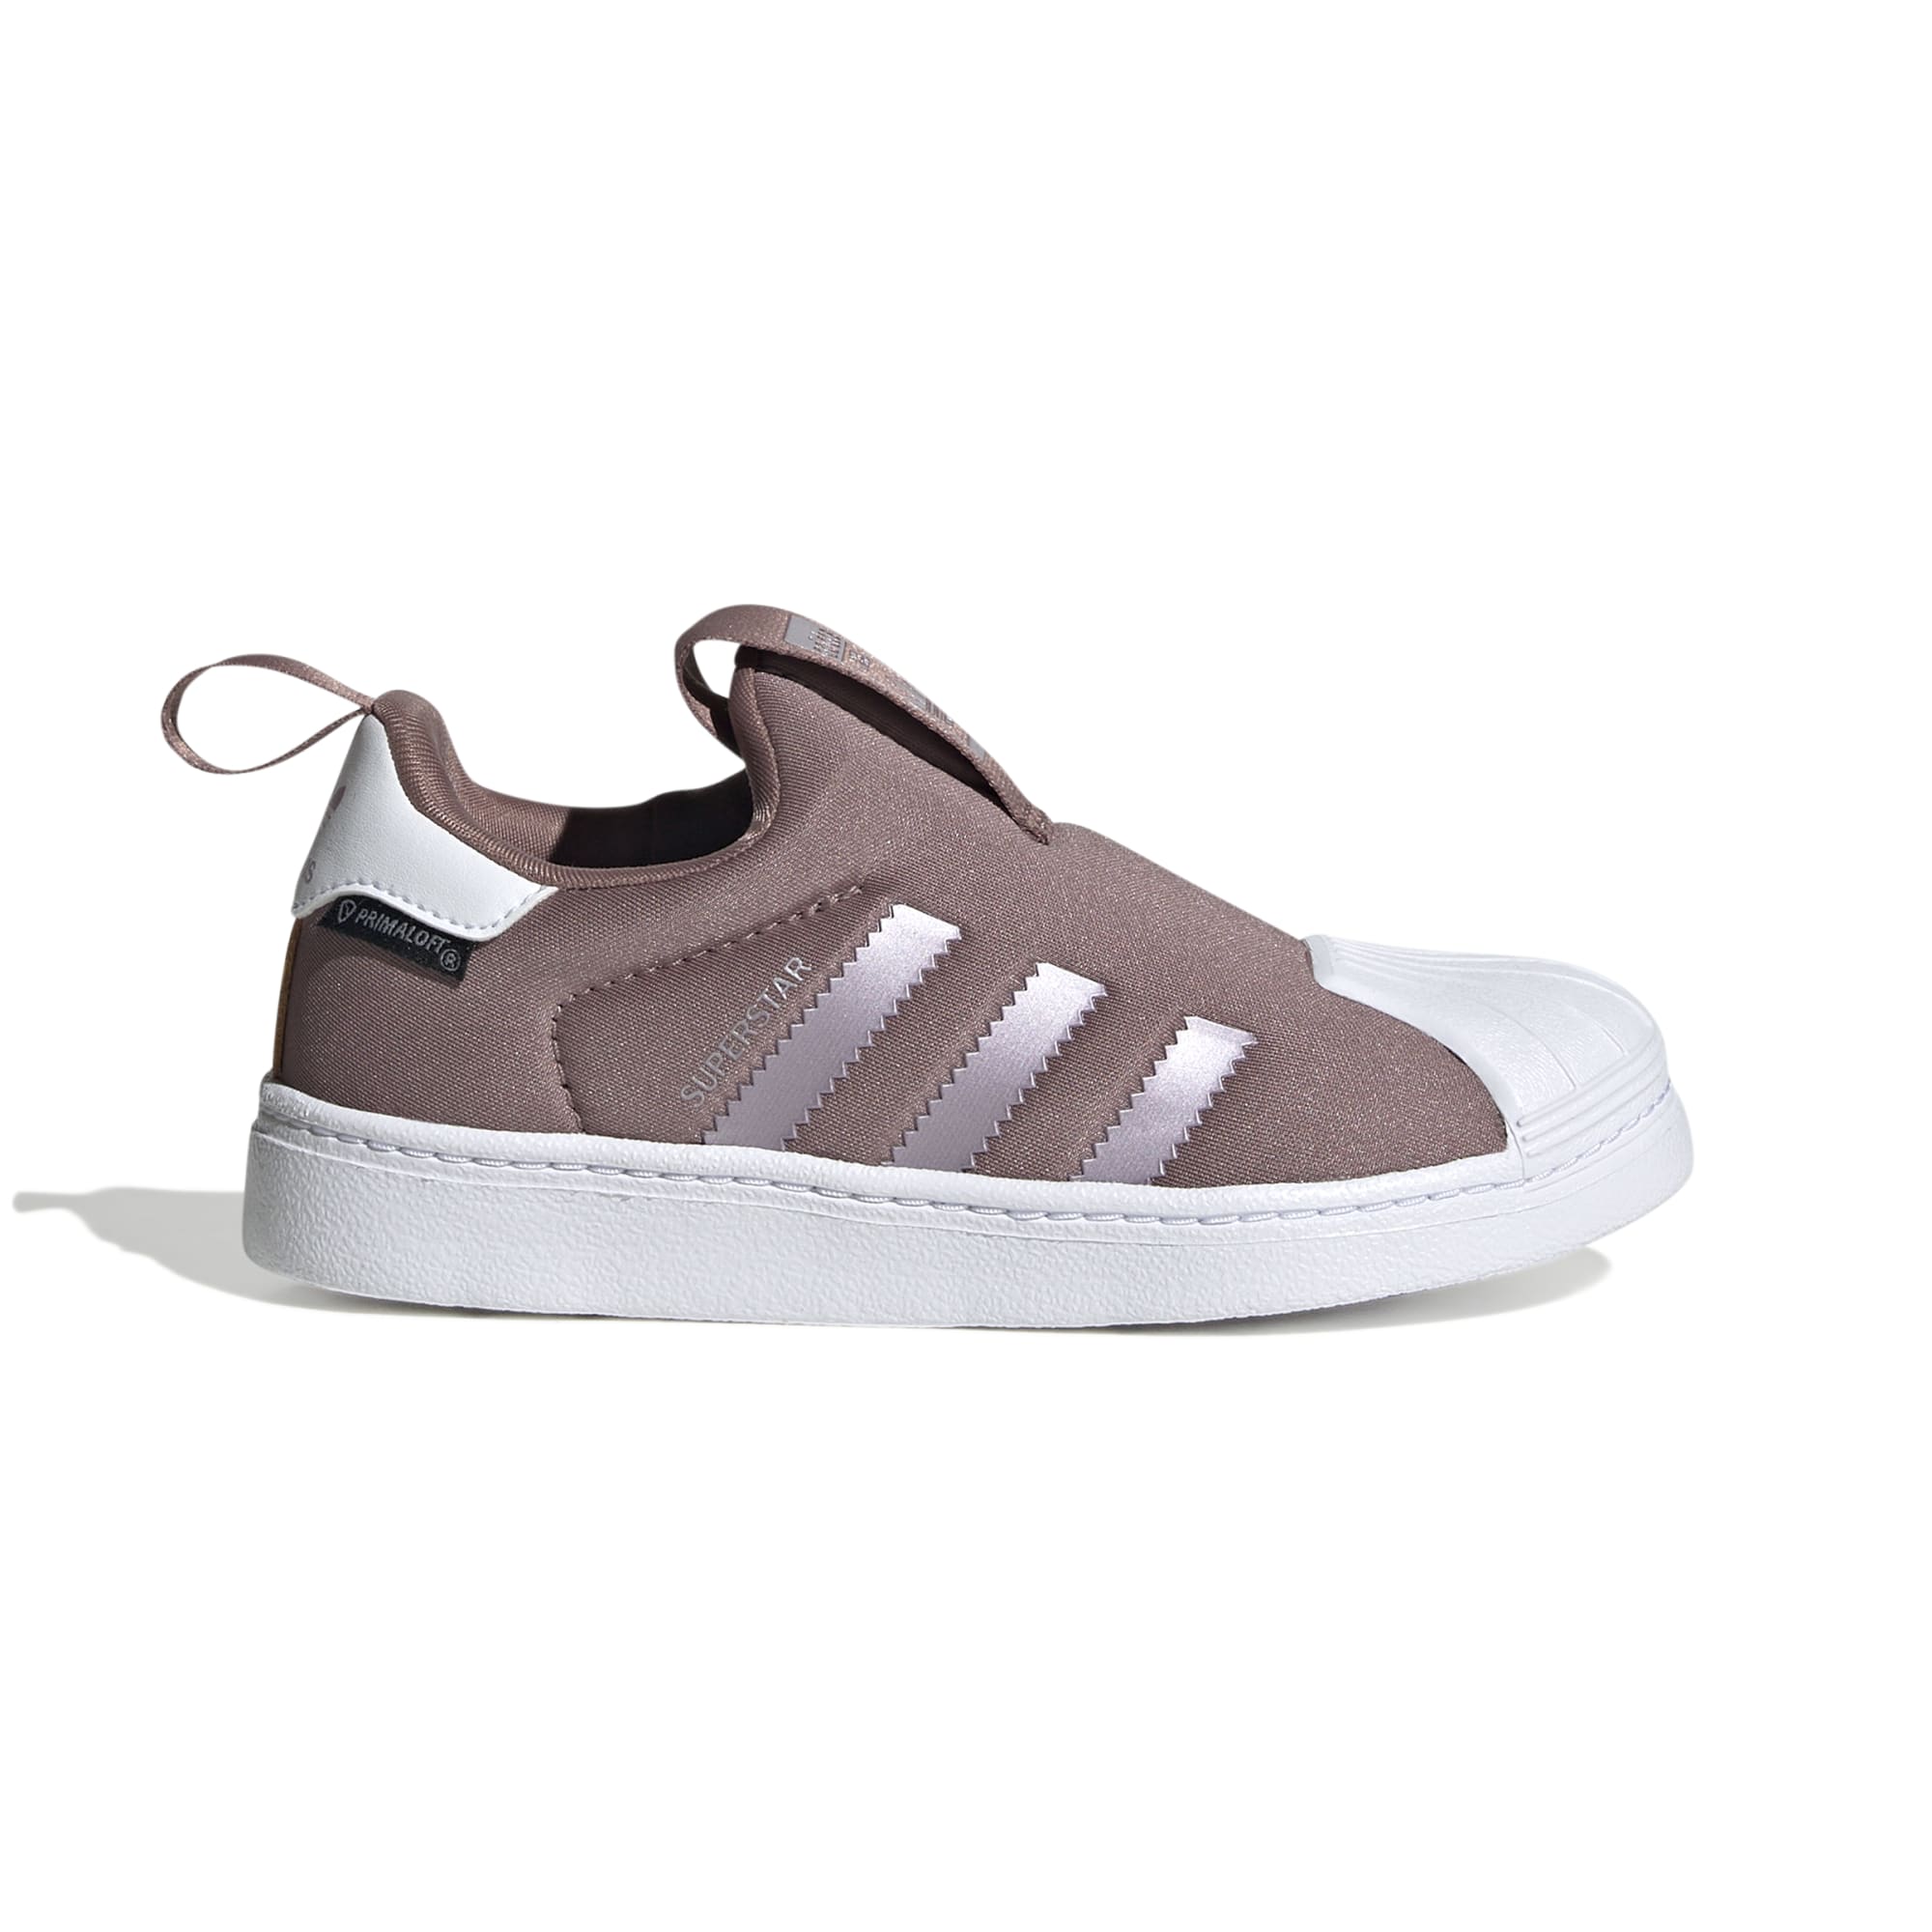 ADIDAS SUPERSTAR 360 C GY9178 SNEAKERS (YG)